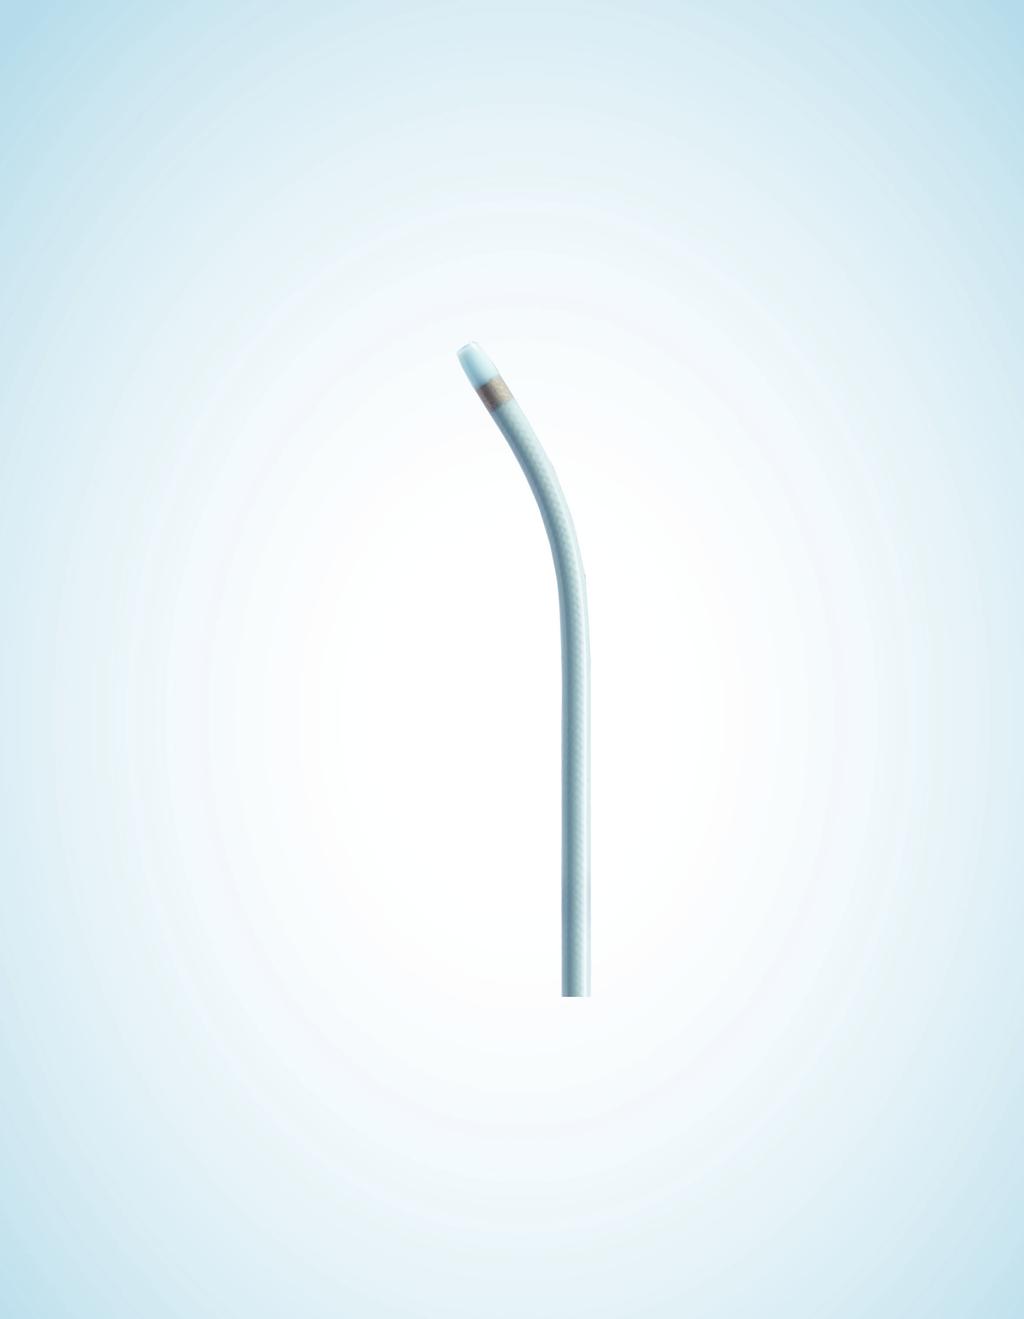 SUPPORT CATHETERS, Y-CONNECTORS, AND GUIDE